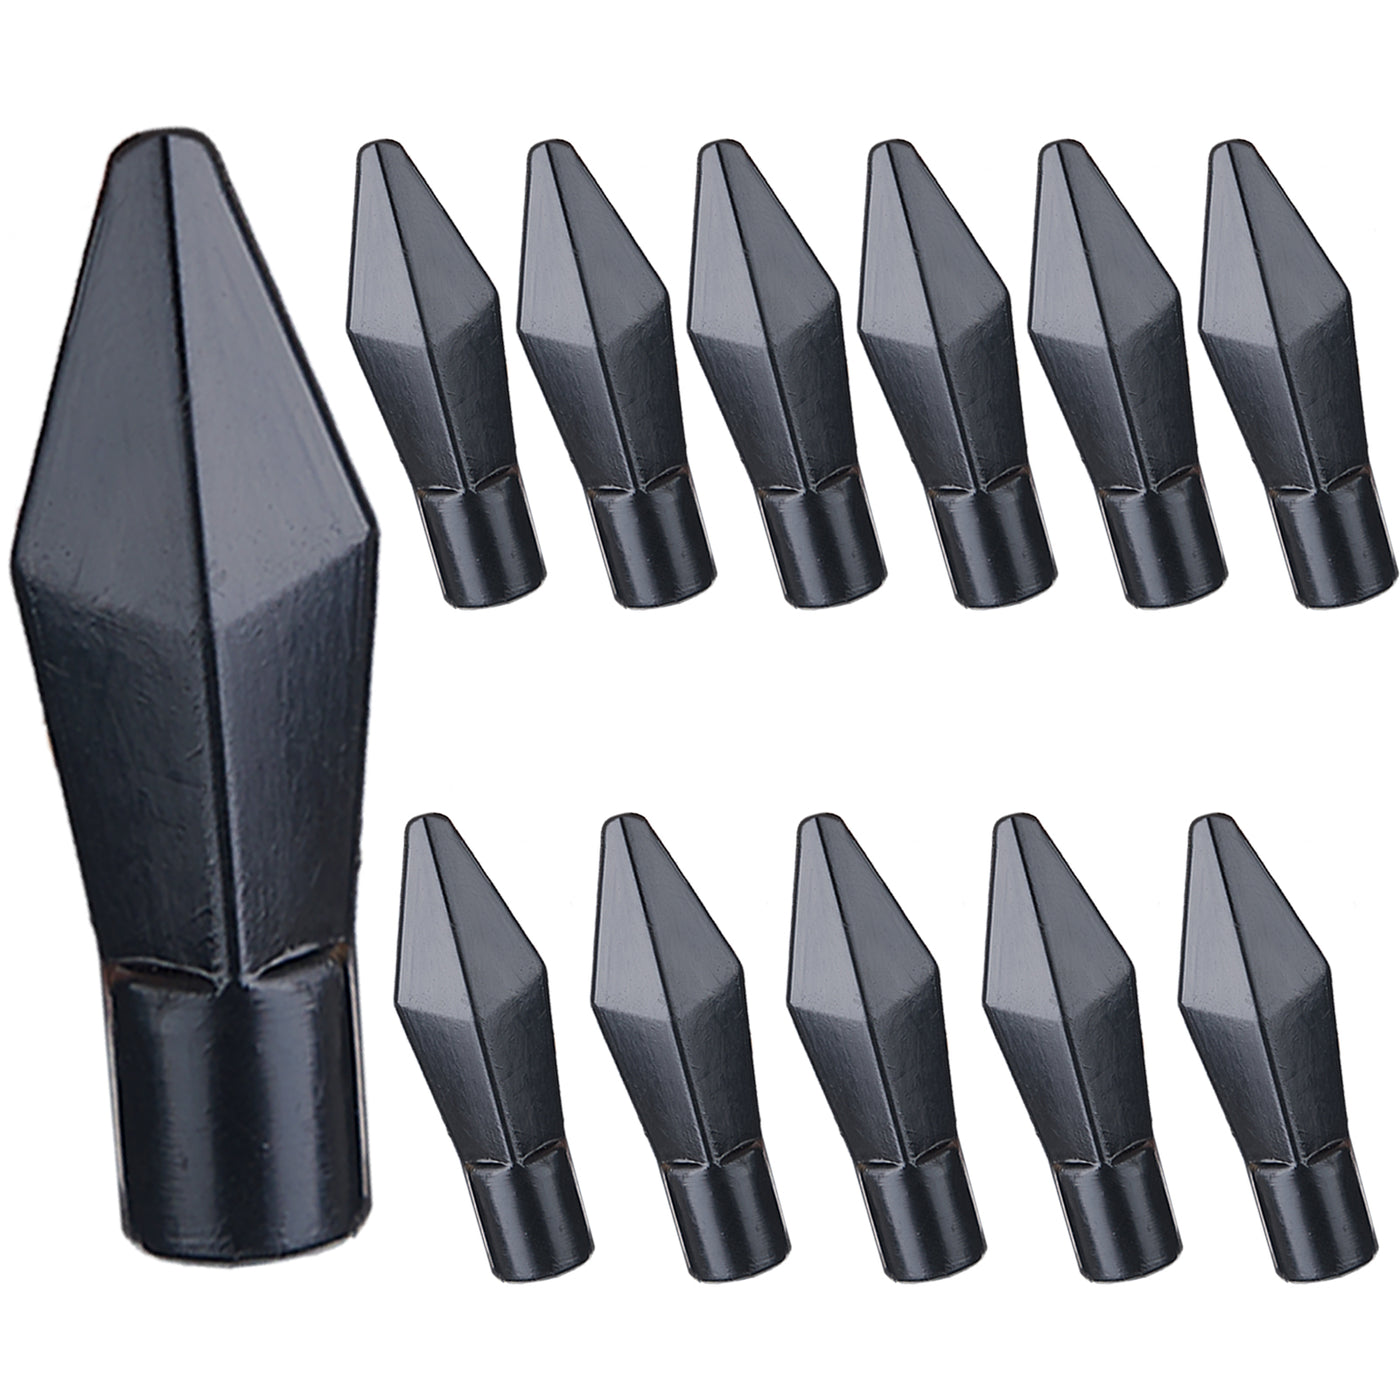 12x Black Rubber Blunt Tapered Arrowheads